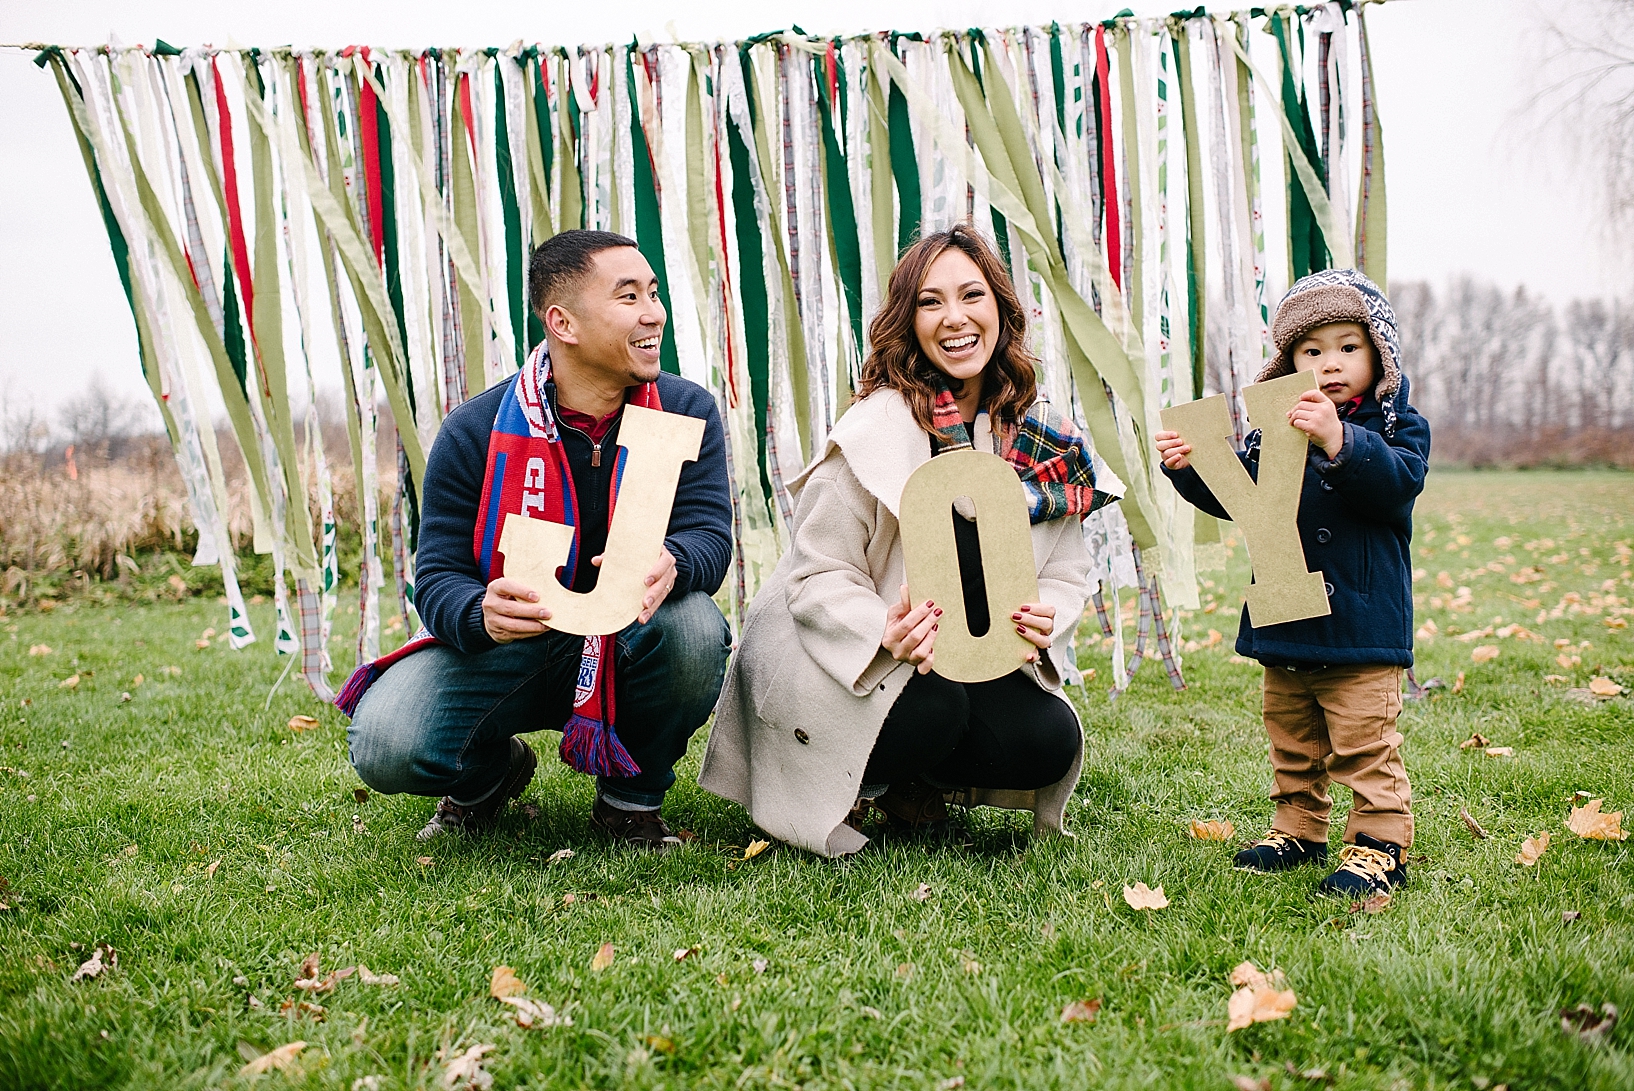 family dressed in winter coats holding JOY letters in front of streamer curtain